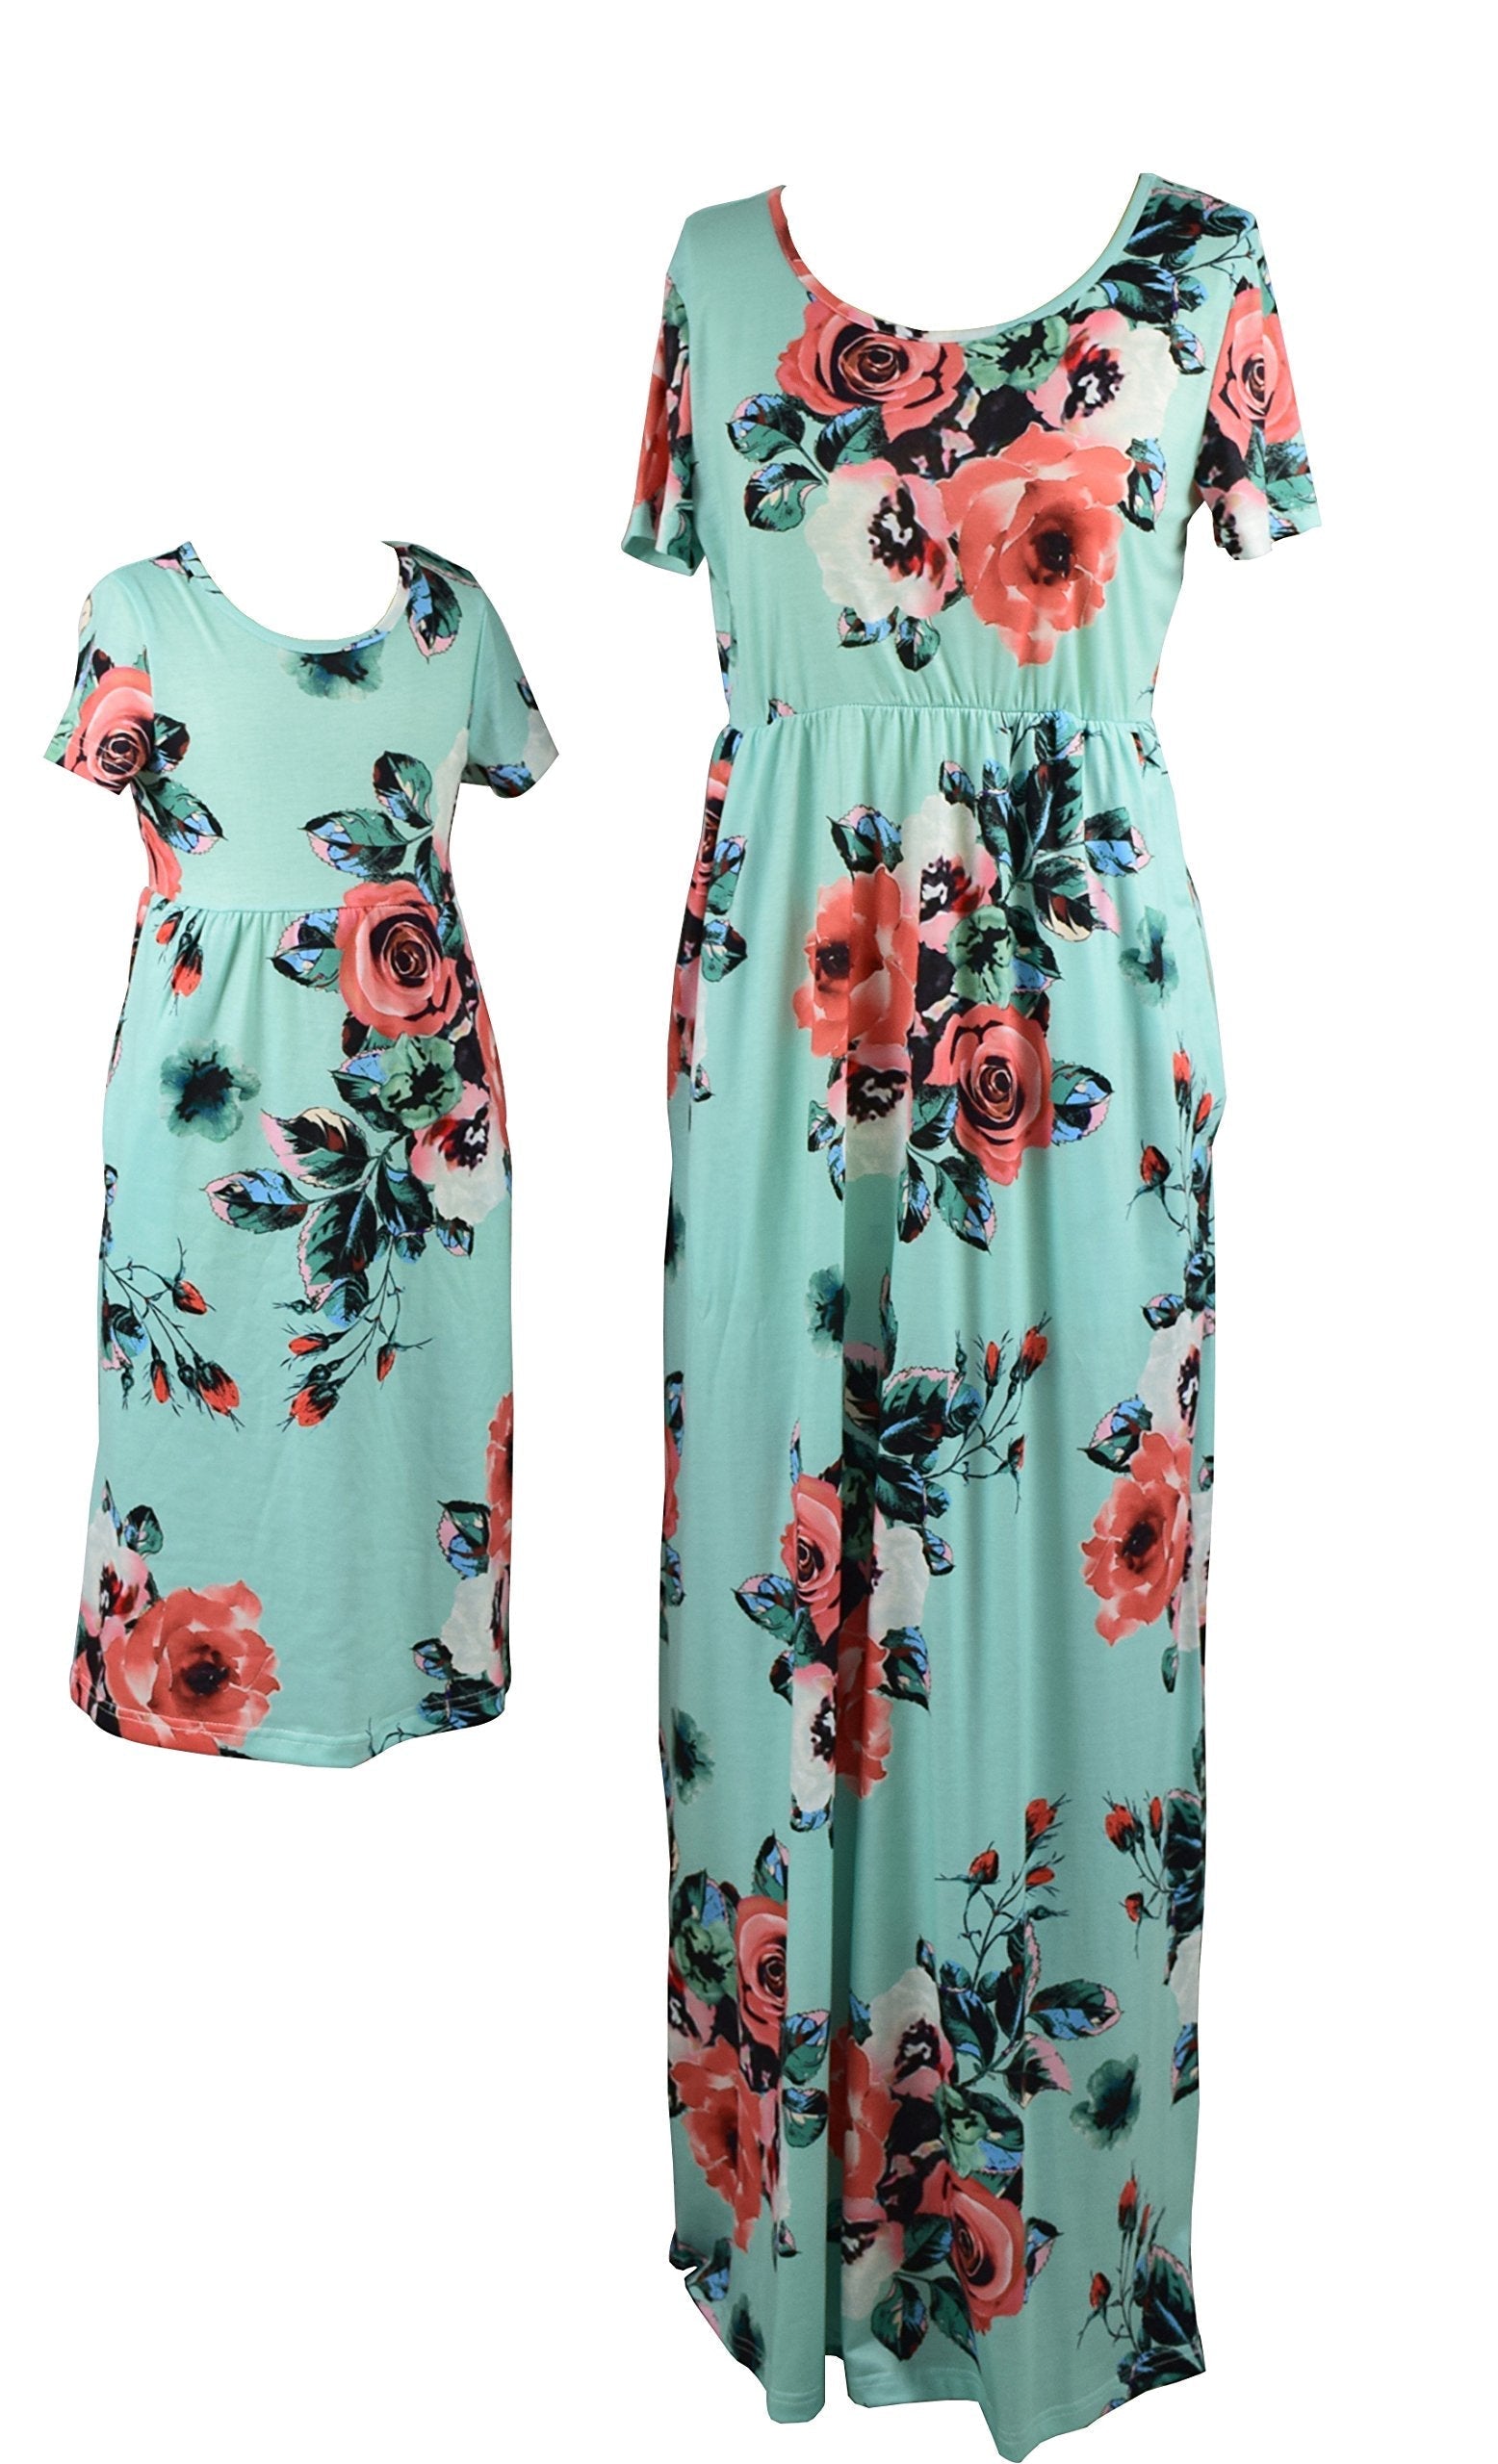 Mom and Me Floral Pattern Prints Matching Dresses